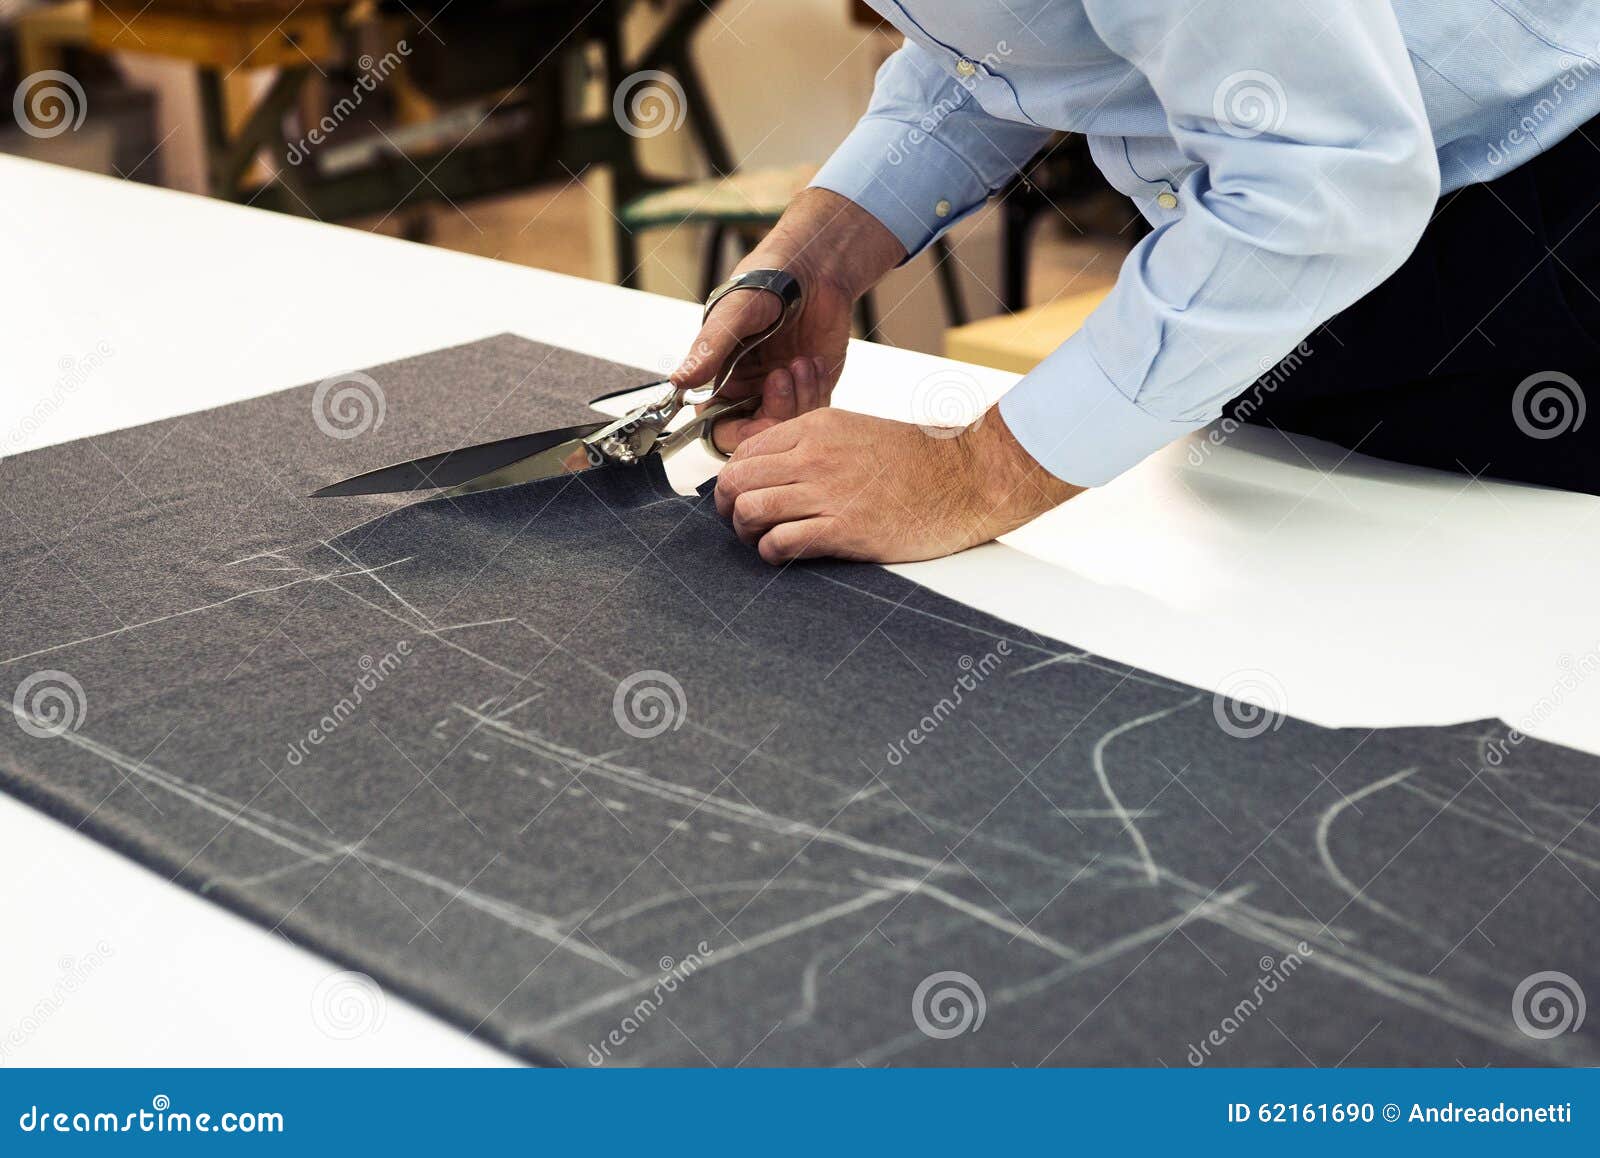 Tailor Working in His Shop Cutting Fabric Stock Photo - Image of